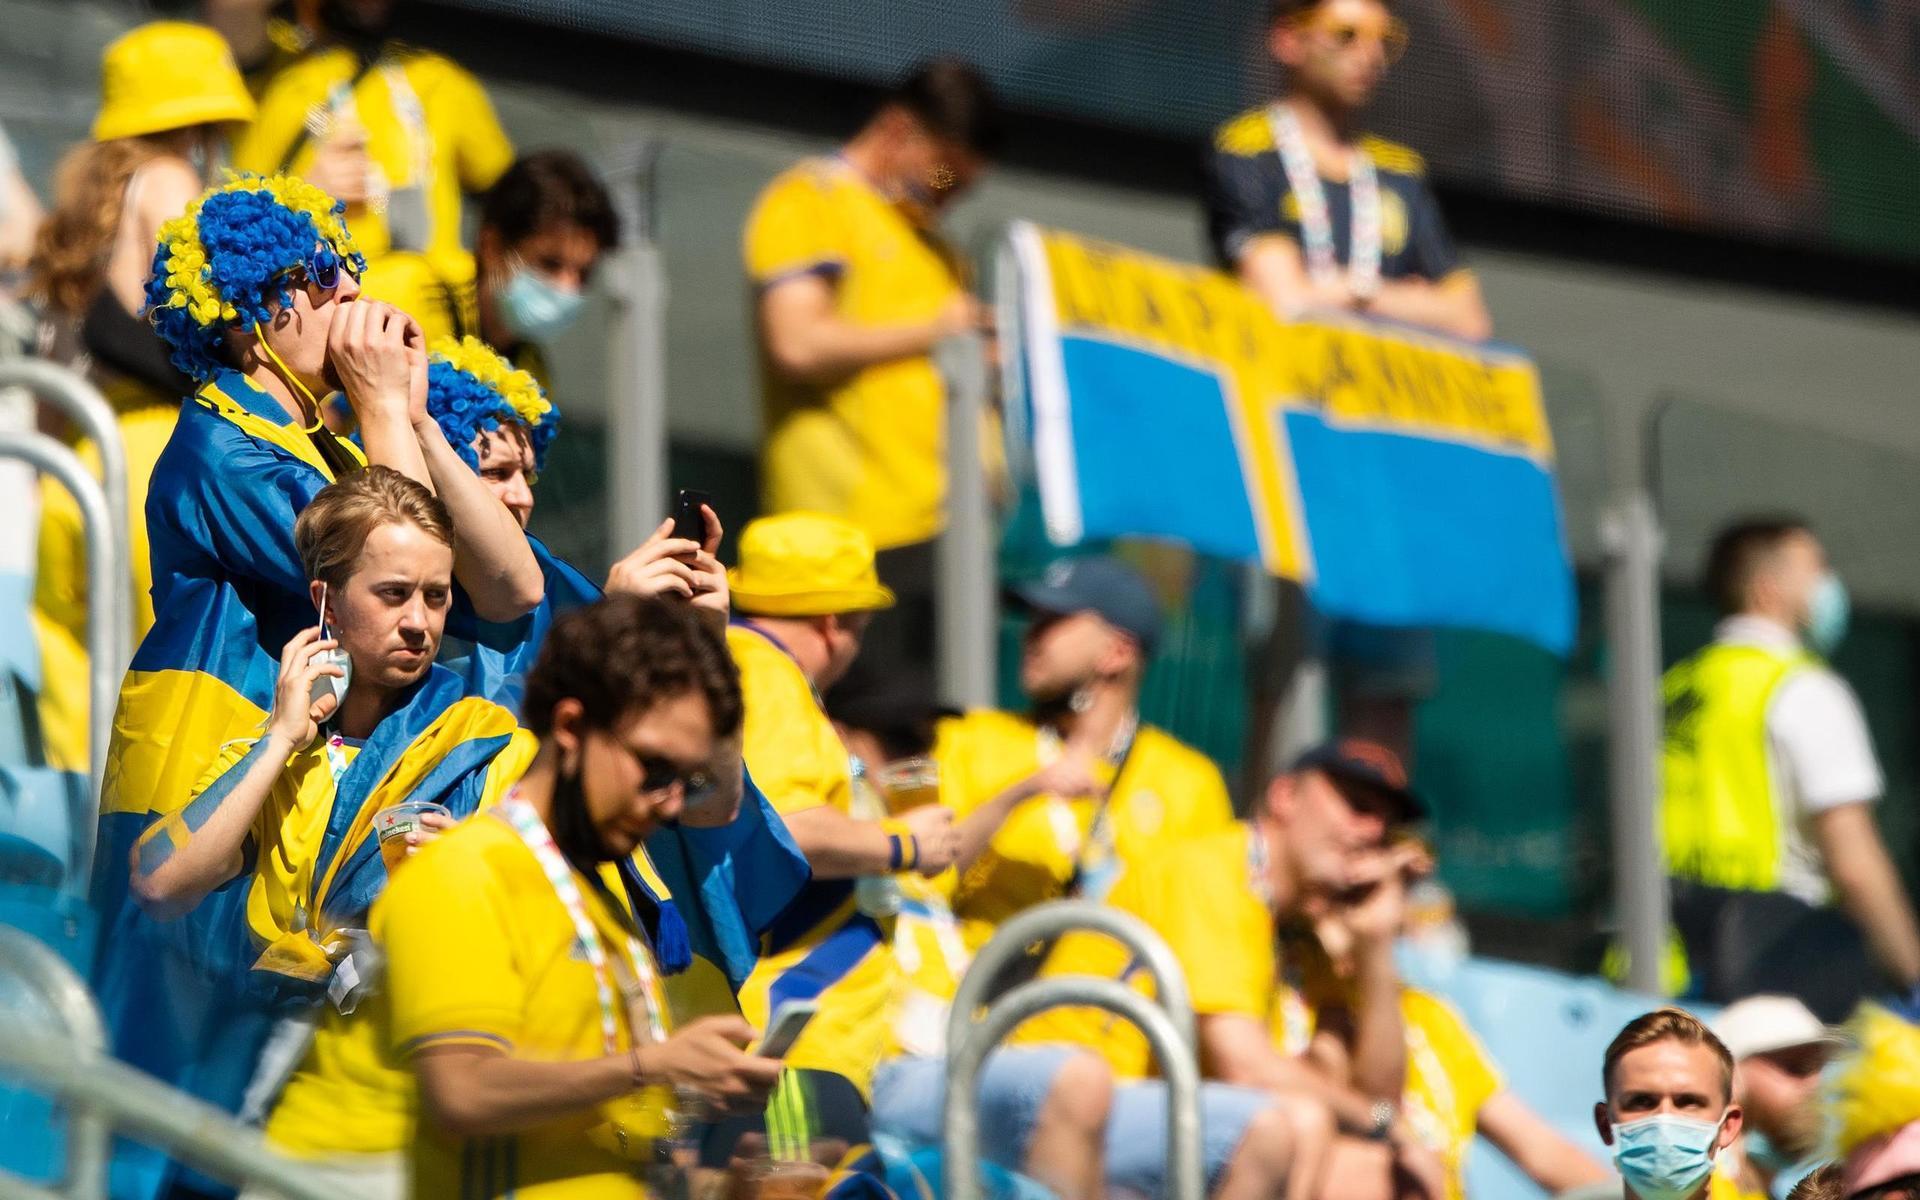 Swedish fans during warm up ahead of the UEFA Euro 2020 Football Championship match between Sweden and Slovakia on June 18, 2021 in Saint Petersburg.